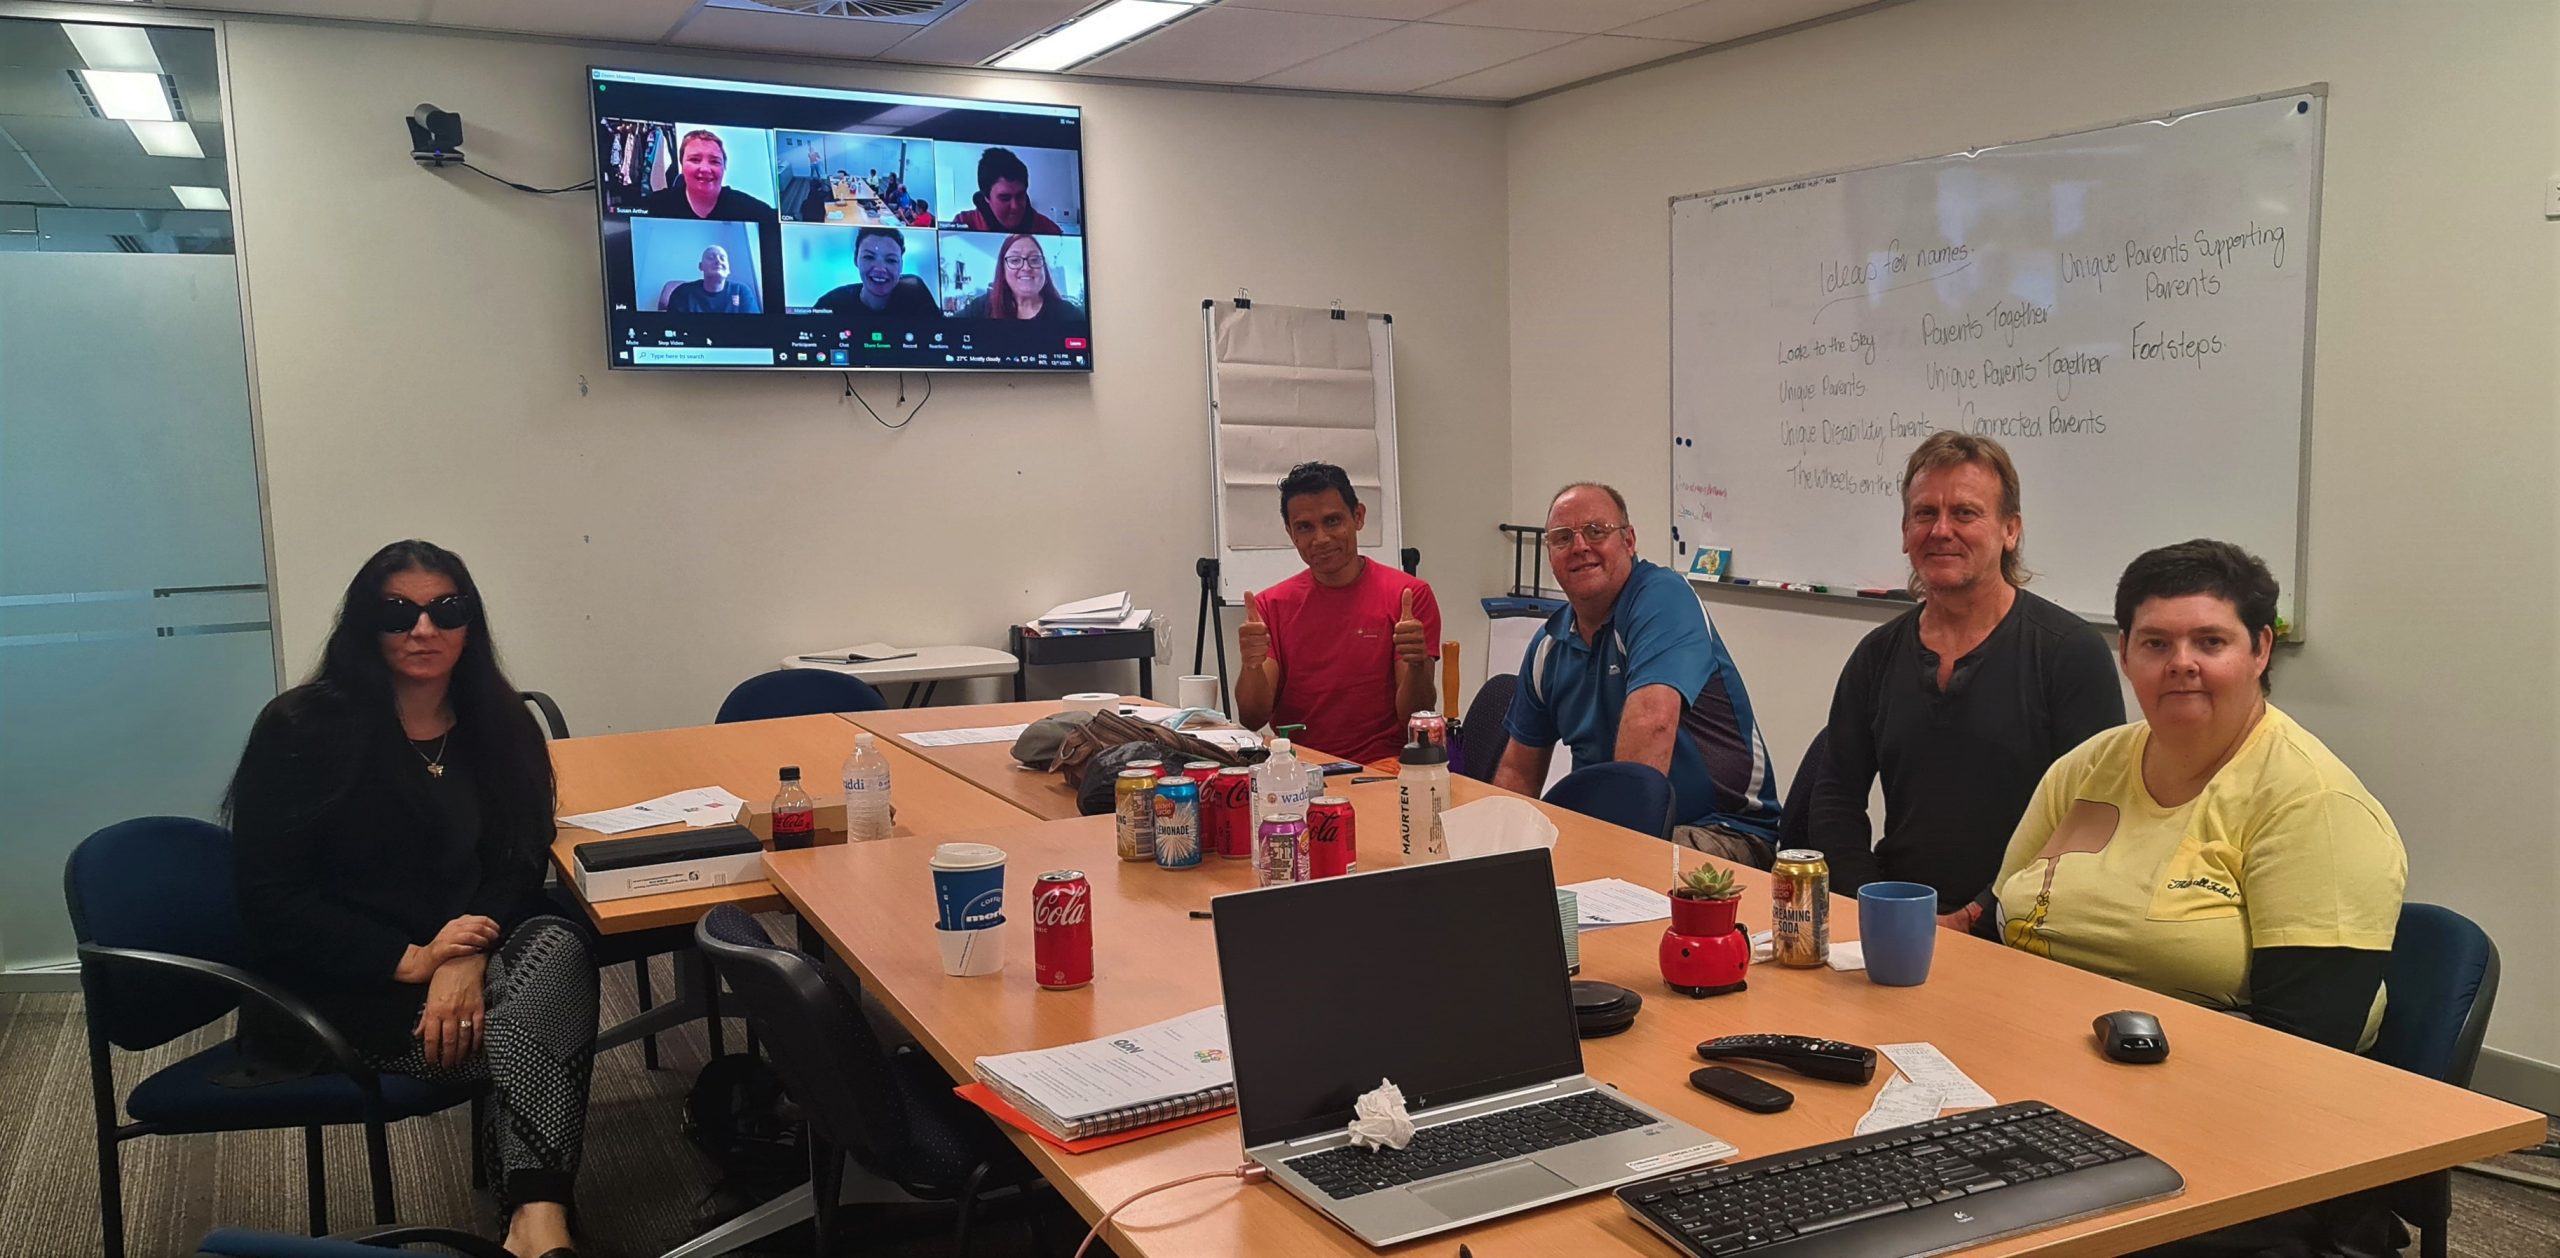 Five people sitting around a table in a board room, and a screen with 6 people on a zoom meeting on the back wall. They are all looking at the camera smiling.